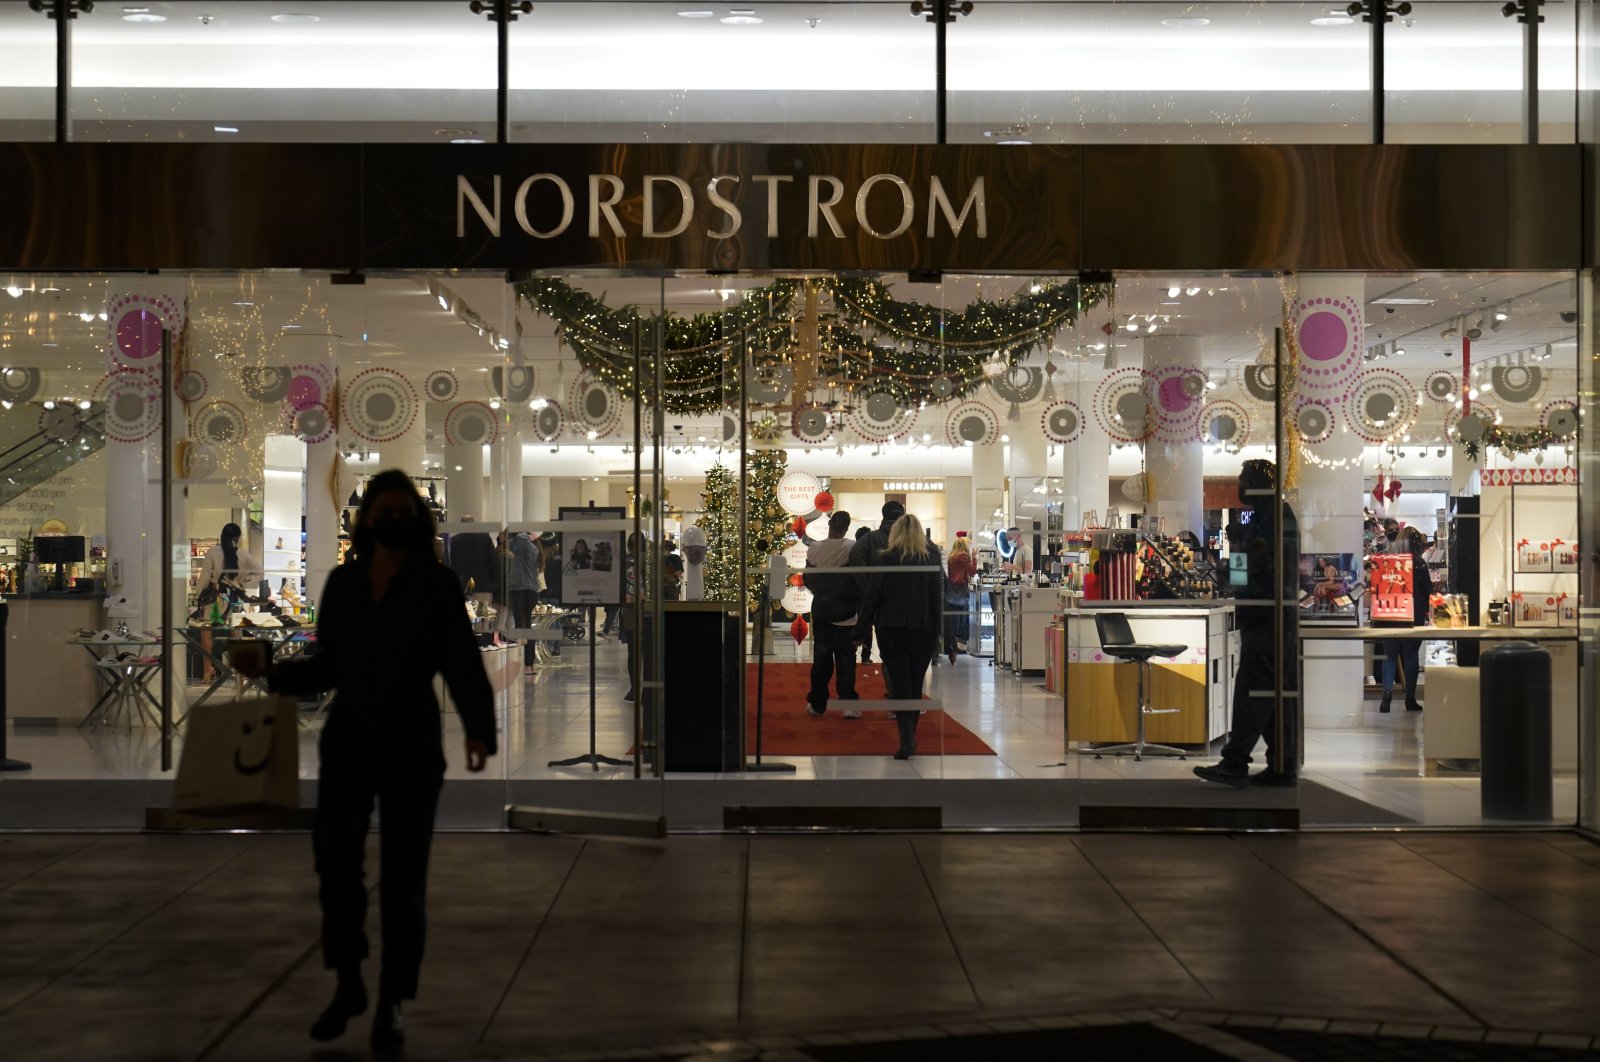 A security guard (R) stands at the entrance to a Nordstrom department store where a recent smash-and-grab robbery took place at the Grove Mall in Los Angeles, U.S., Dec. 2, 2021. (AP File Photo)